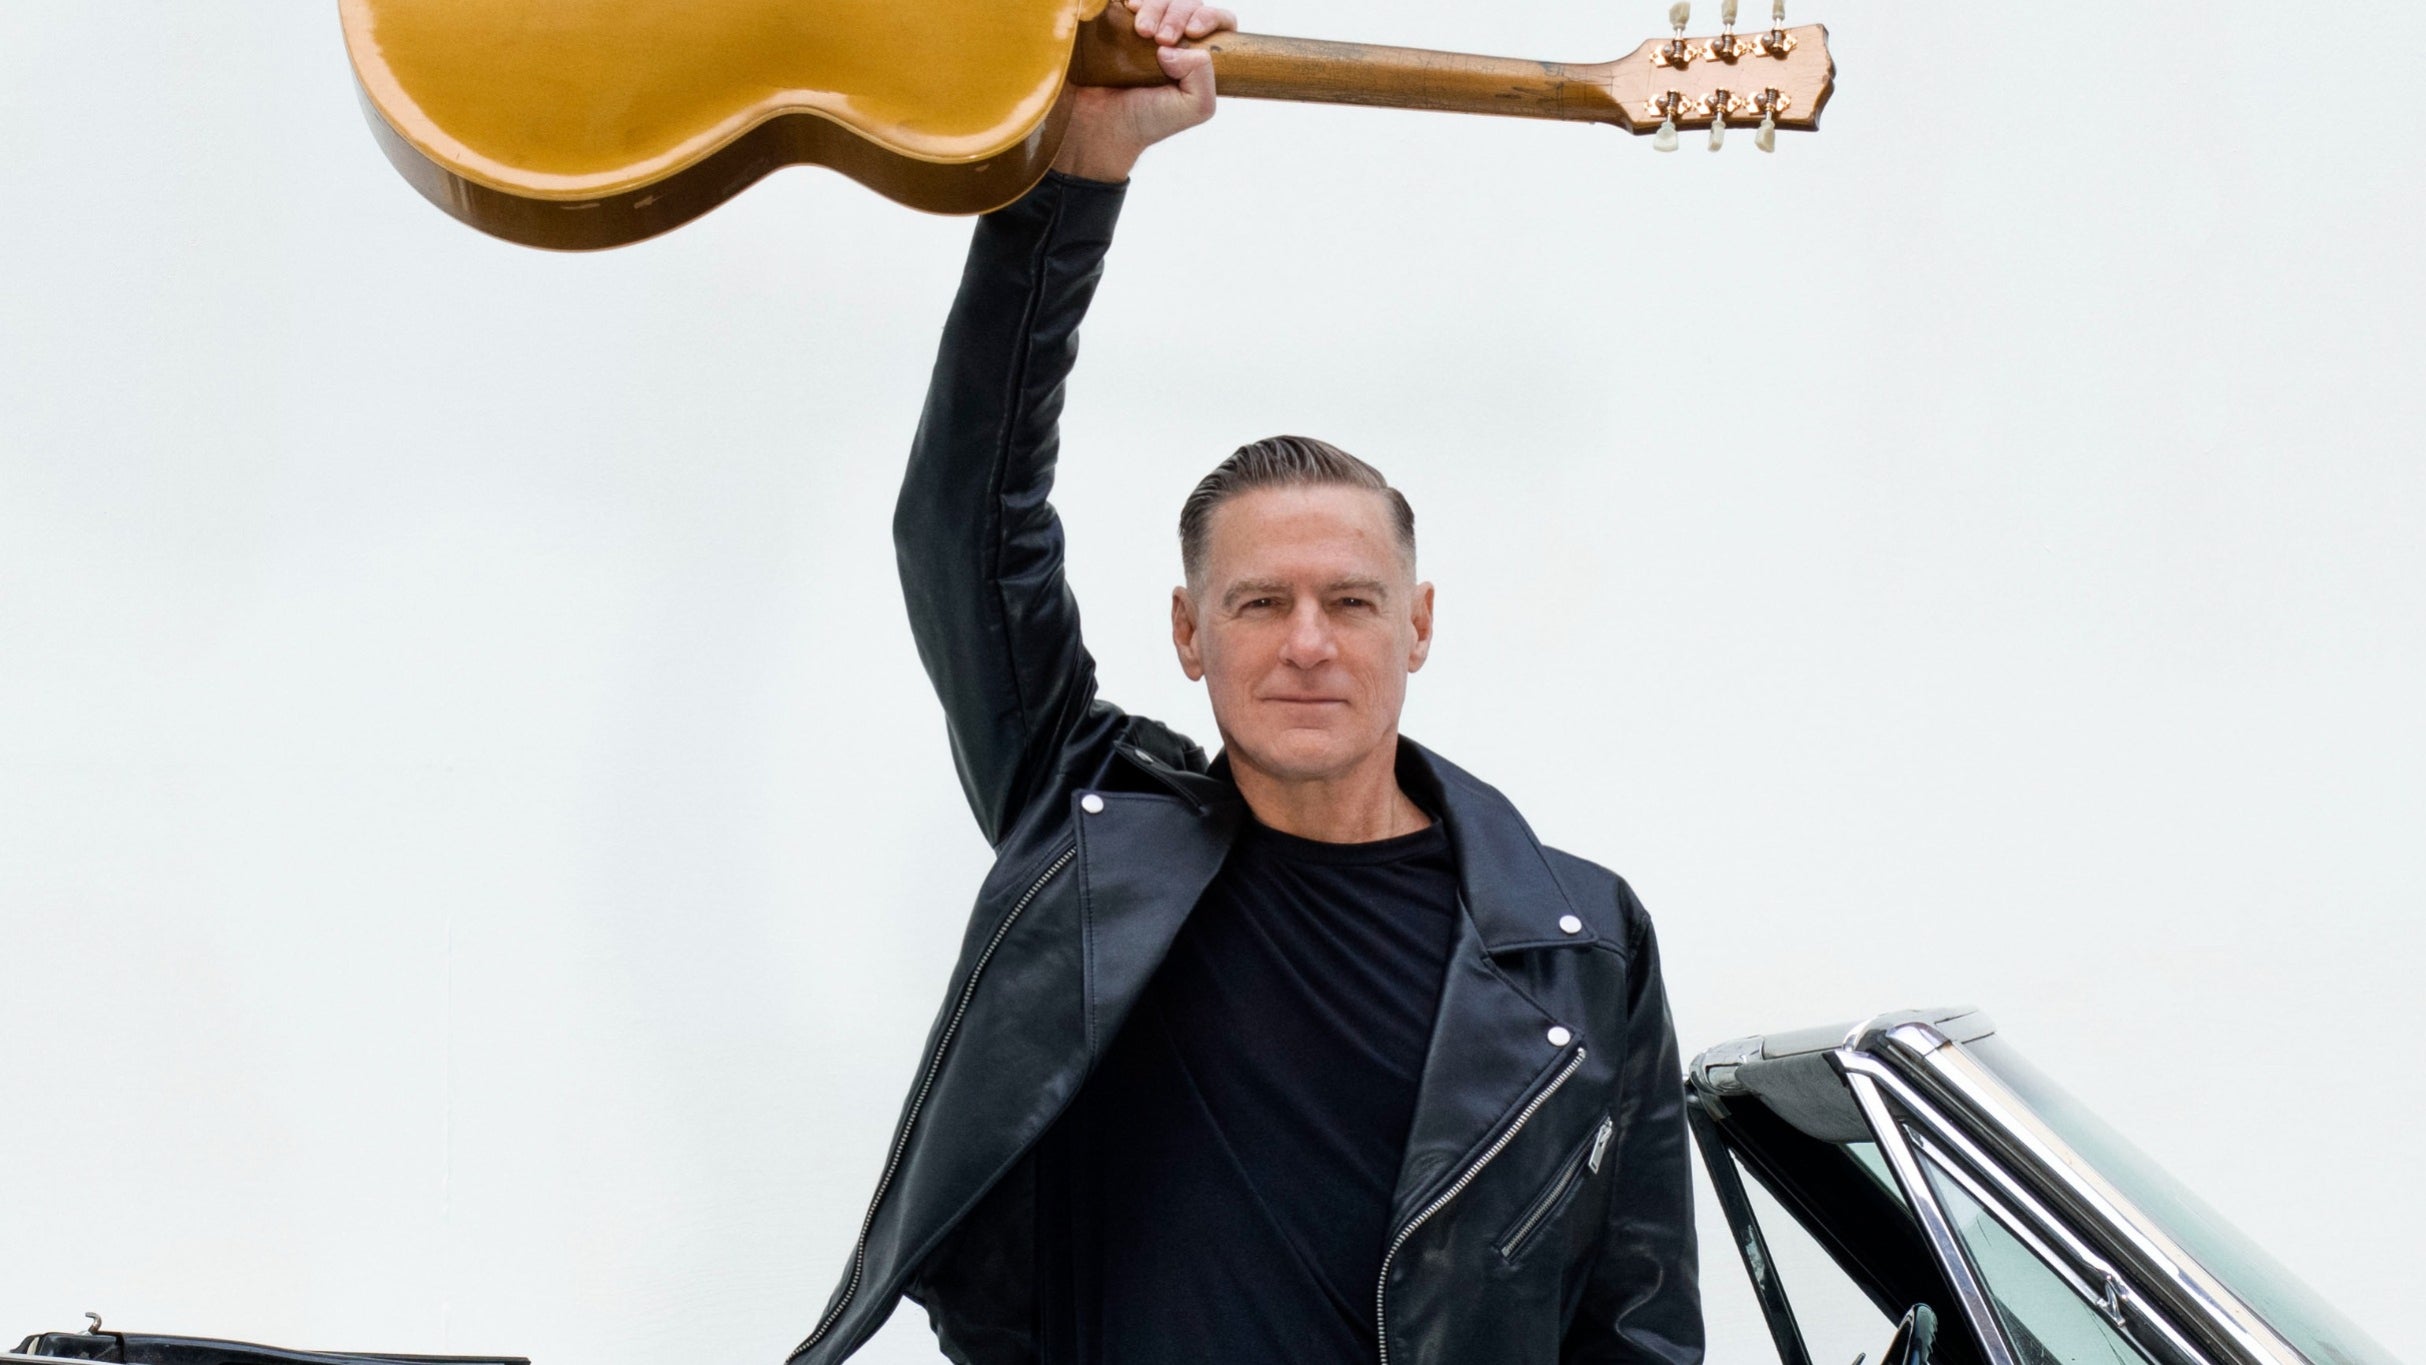 Bryan Adams: So Happy It Hurts w/ Eurythmics Songbook ft. Dave Stewart free presale passcode for early tickets in Fairfax